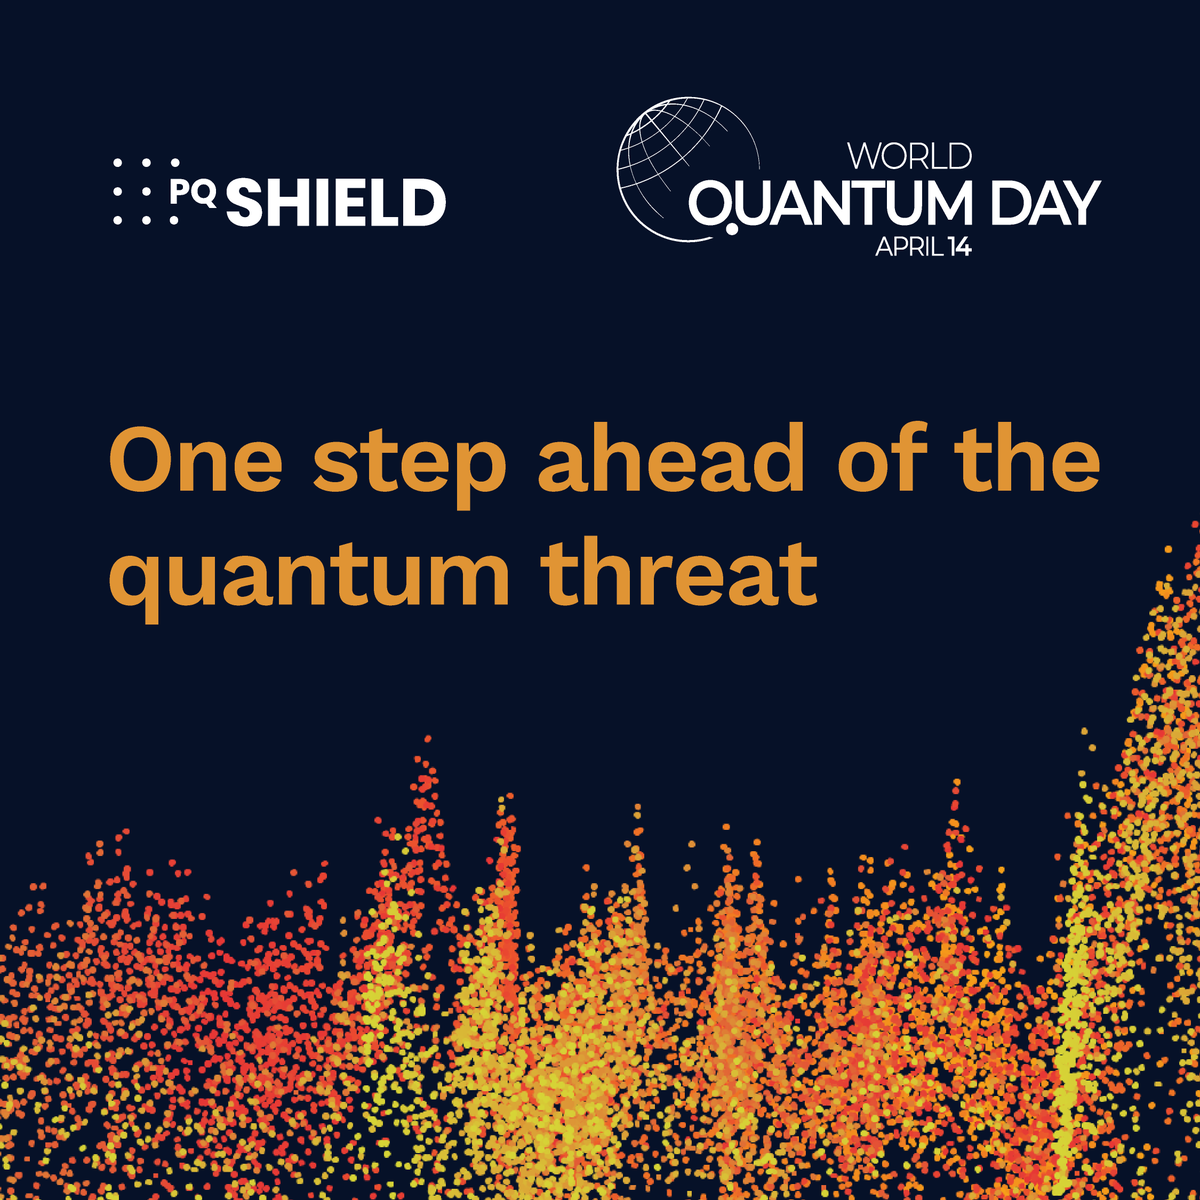 As we celebrate World Quantum Day, there is no doubt that the PQShield fully understands the reality of the quantum threat, and that we are fully committed to helping the world defend against it. hubs.li/Q02sydgr0 #worldquantumday #quantumthreat #cryptography